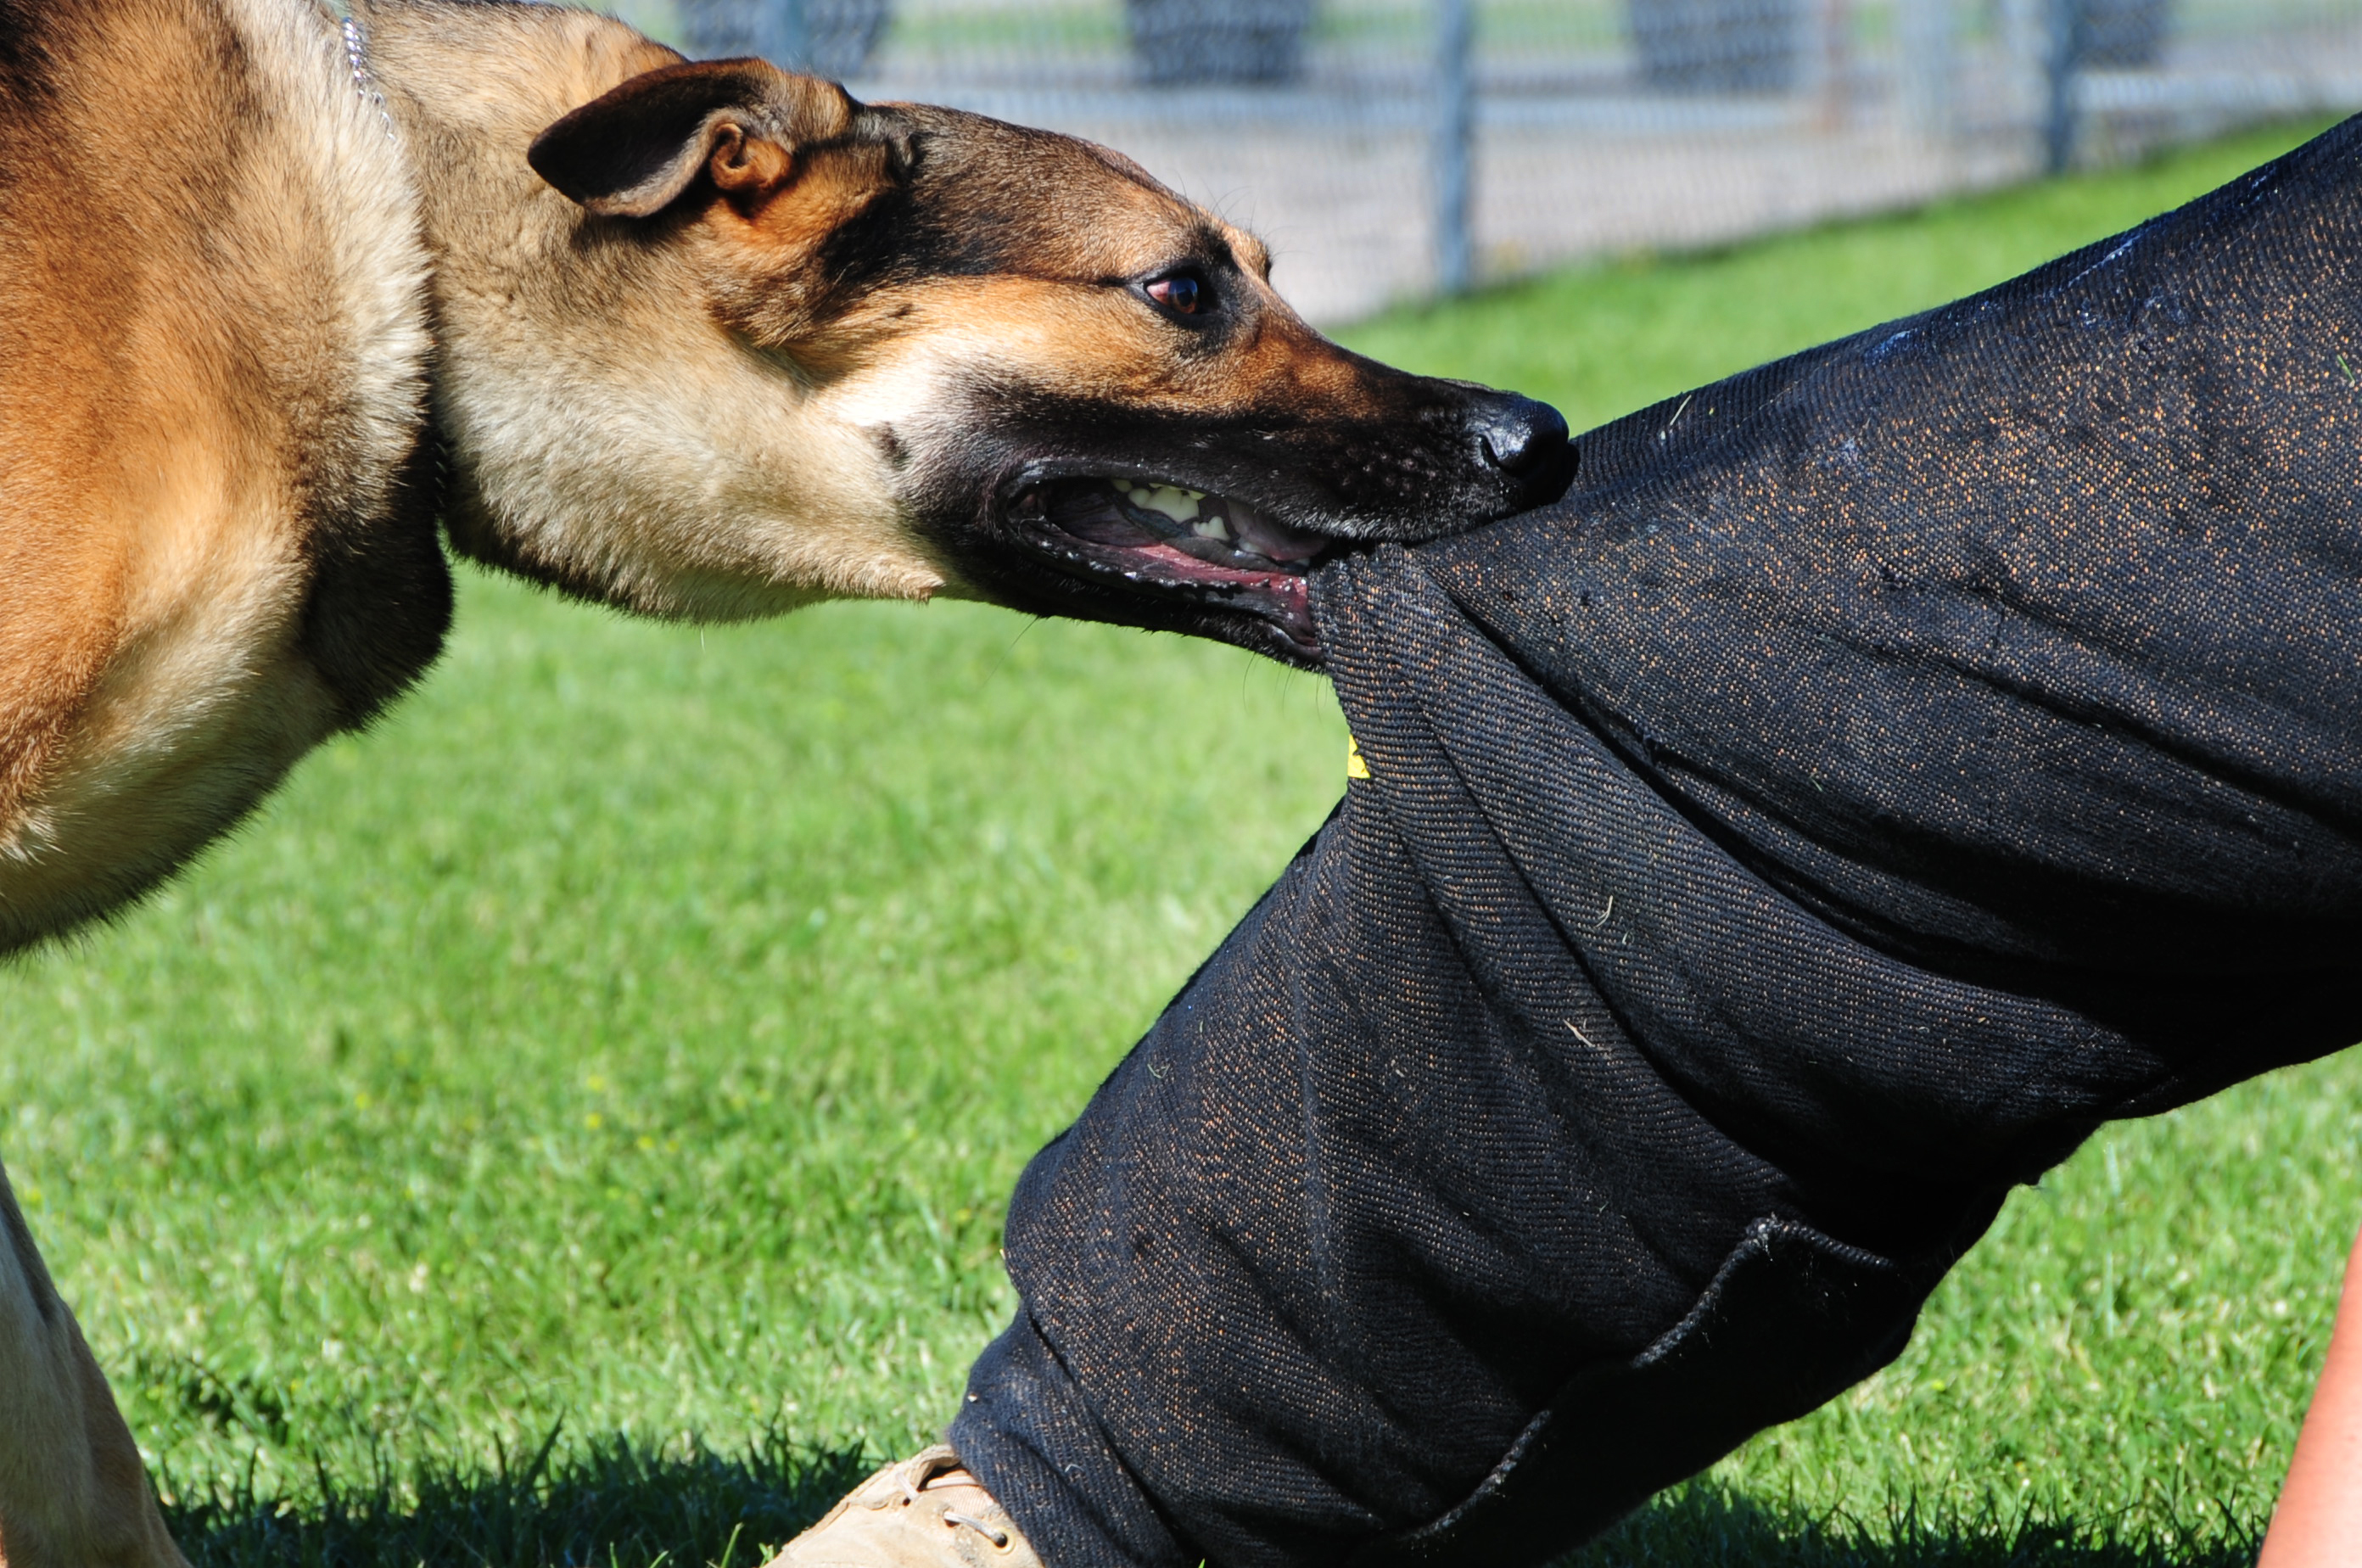 ELLSWORTH AIR FORCE BASE, S.D. -- Bak, 28th Security Forces Squadron military working dog, bites down on Staff Sgt. Kevin Nelson, 28 SFS K-9 unit trainer, during a training session, June 24. Sergeant Nelson wears a Òbite suitÓ to protect his legs from serious injury during the training. (U.S. Air Force photo/Airman 1st Class Anthony Sanchelli)